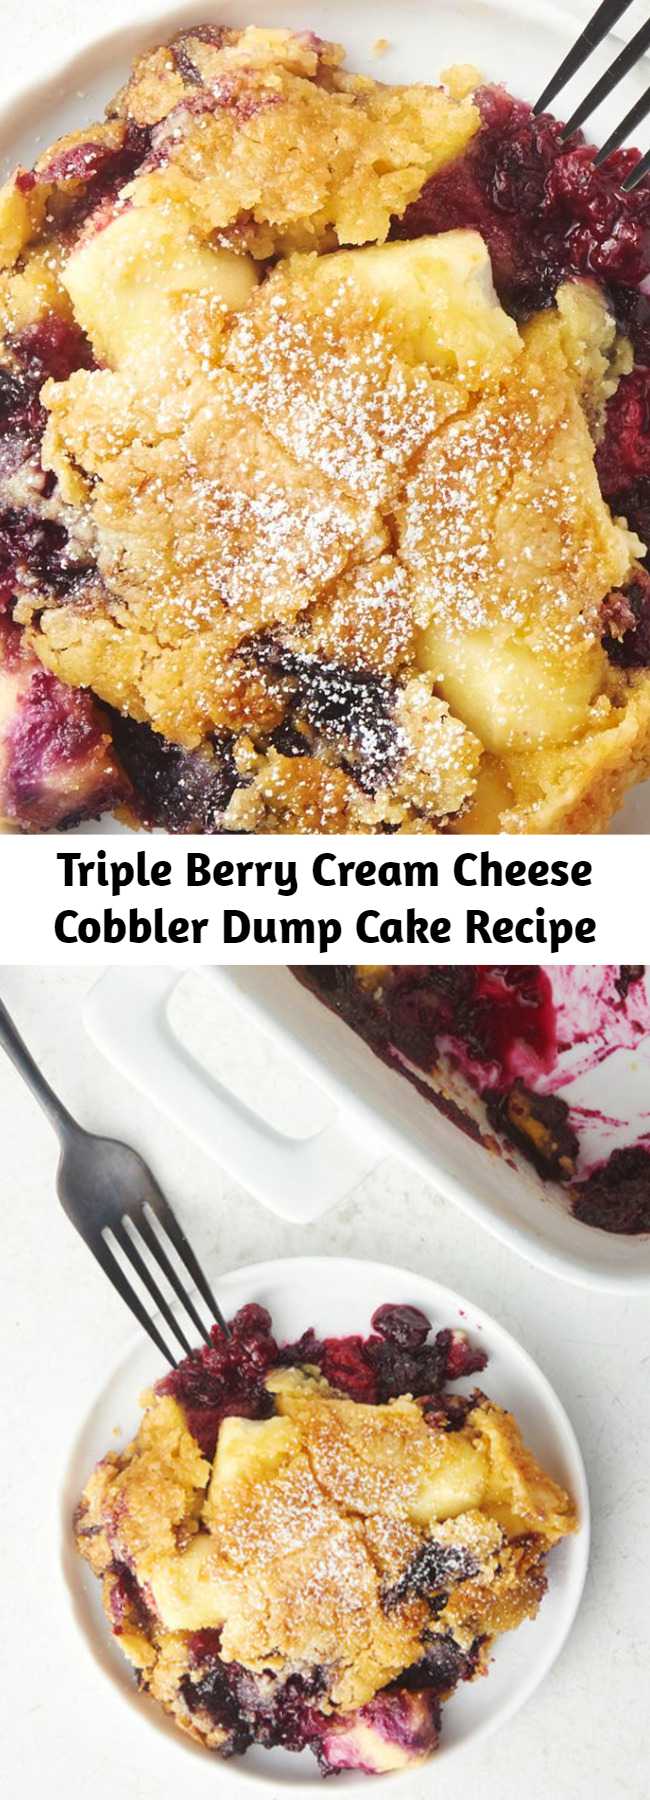 Triple Berry Cream Cheese Cobbler Dump Cake Recipe - When a fresh berry cobbler meets an easy dump cake, the end result is pure magic. Raspberries, blueberries and blackberries get mixed with cream cheese and cake mix for an easy dessert that's no-fuss and totally delicious.